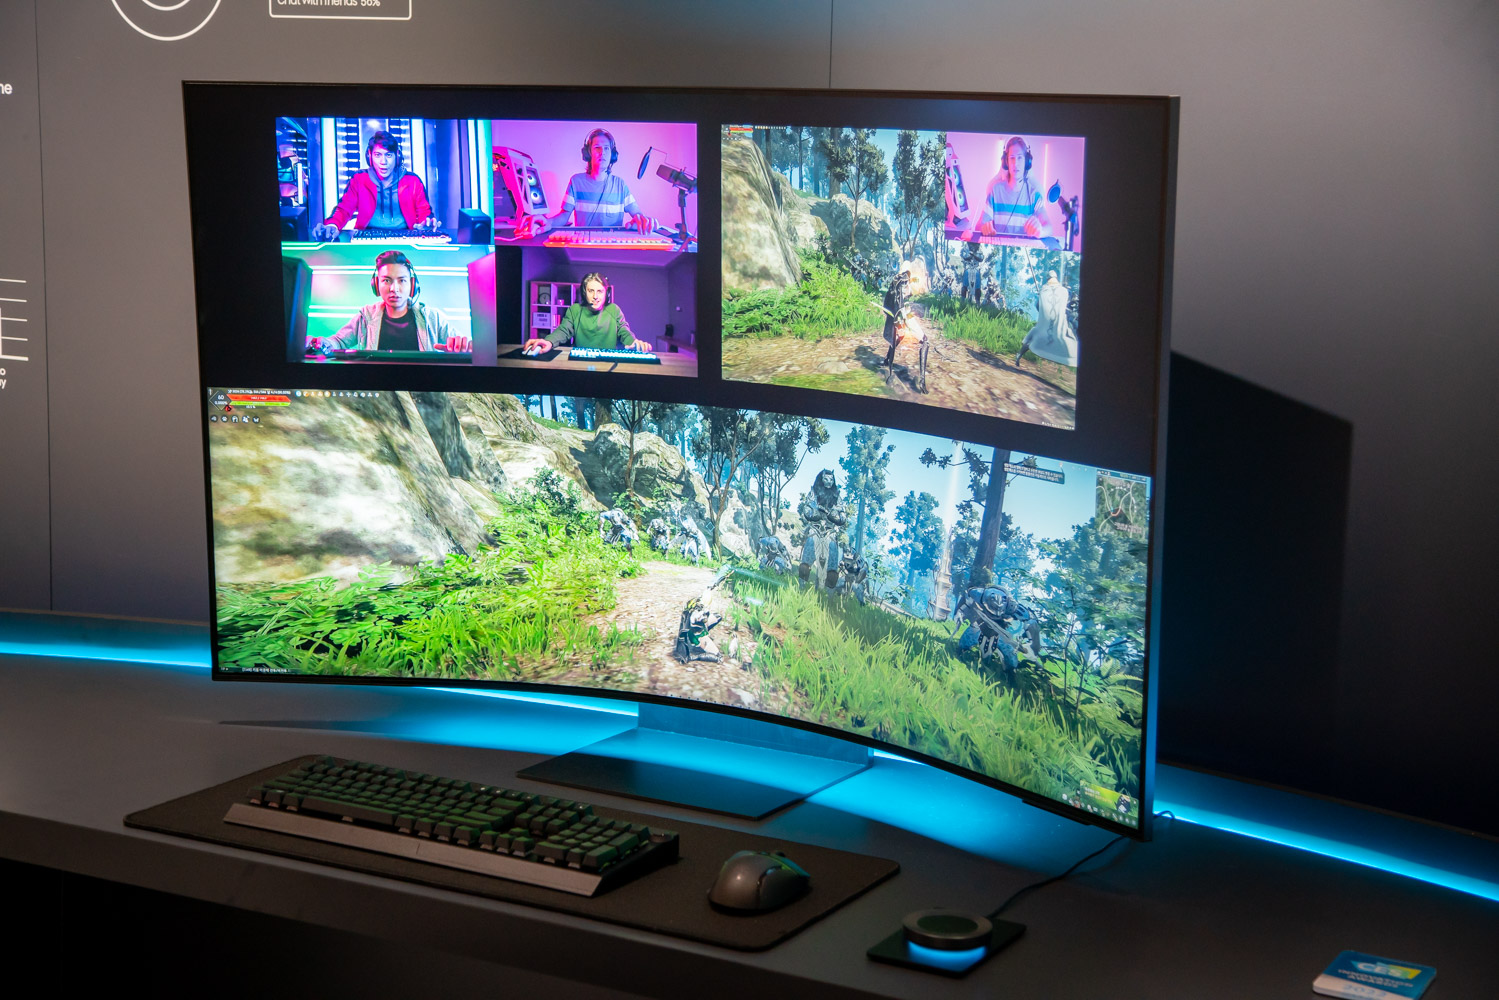 Samsung Launches Curved 55-Inch Odyssey Ark Gaming Monitor at